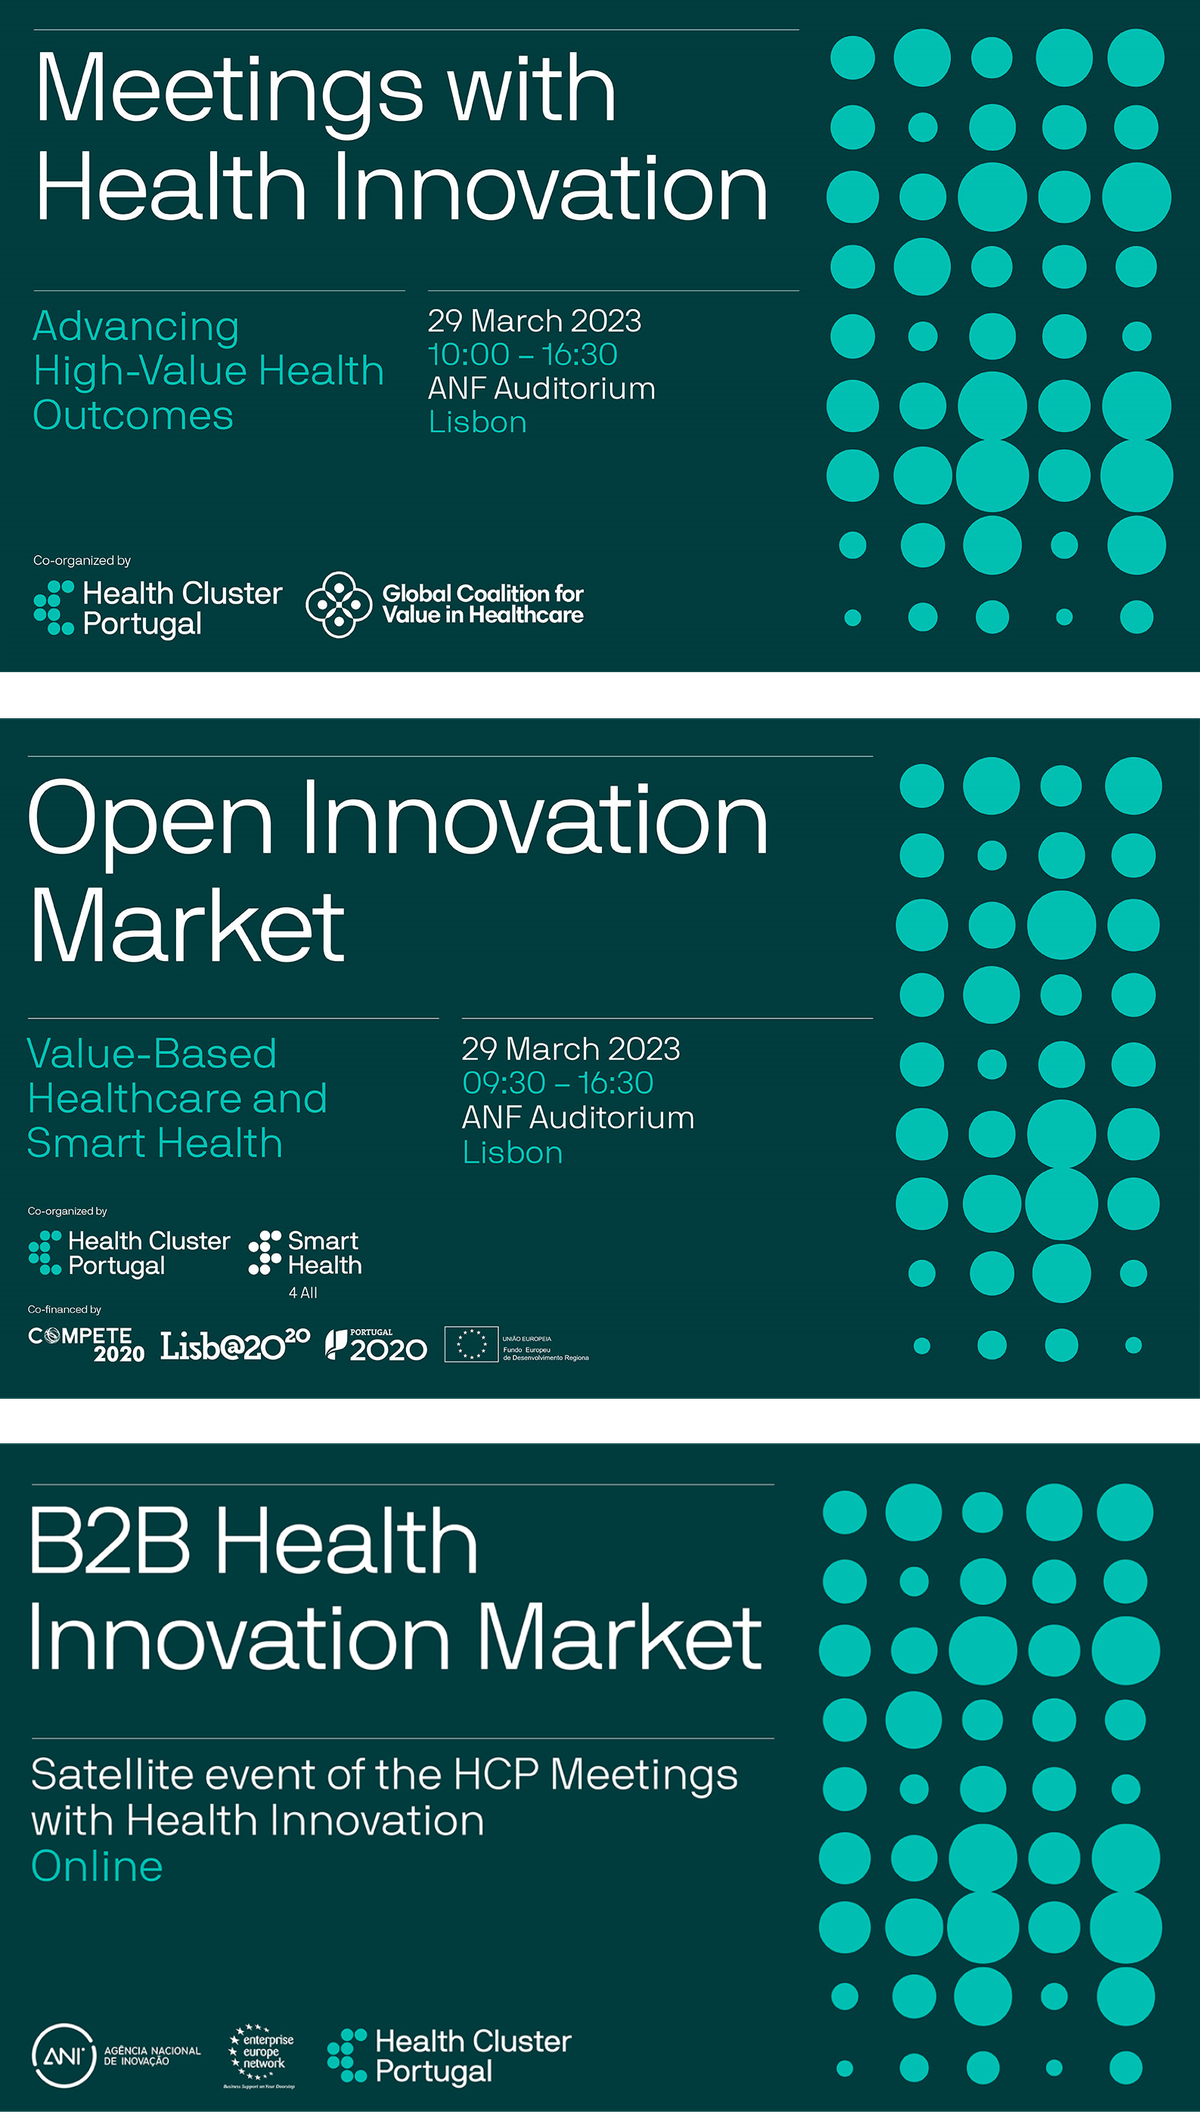 Meetings with Health Innovation "Advancing High-Value Health Outcomes"